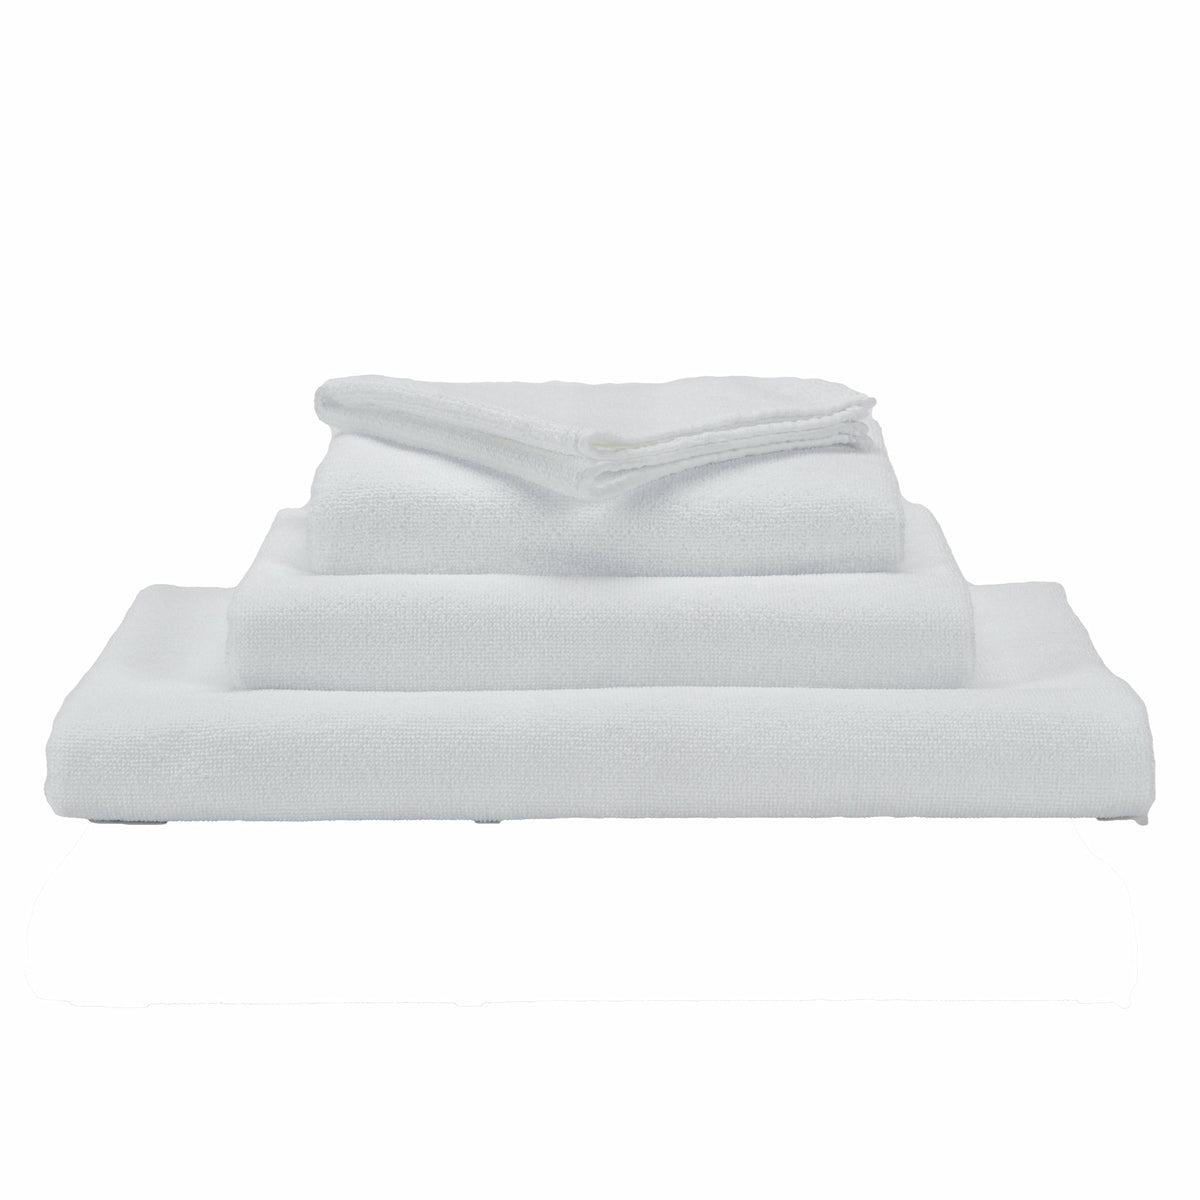 Abyss Spa Bath Towels - White